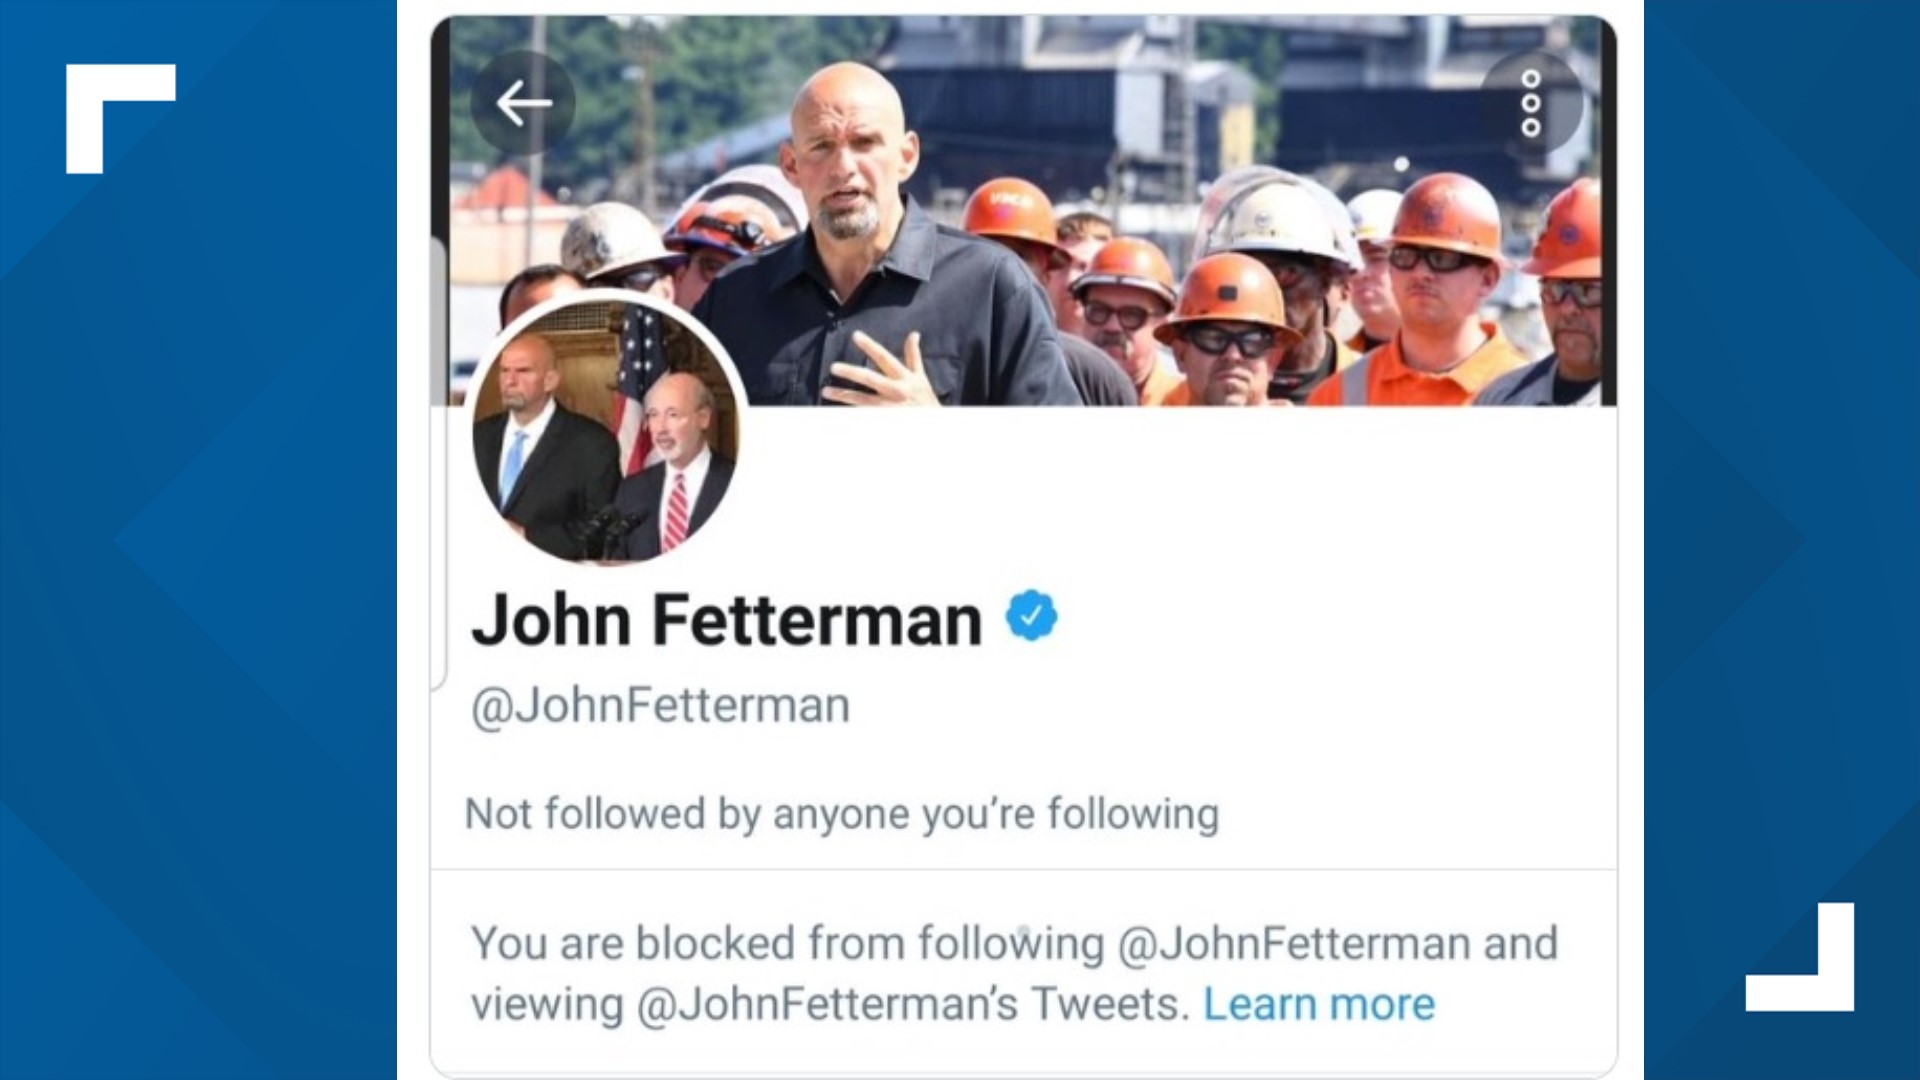 Lt. Gov. John Fetterman says he's unblocked the 2 men who threatened to sue, but only because he doesn't want to risk a lawsuit that could put taxpayer money at risk